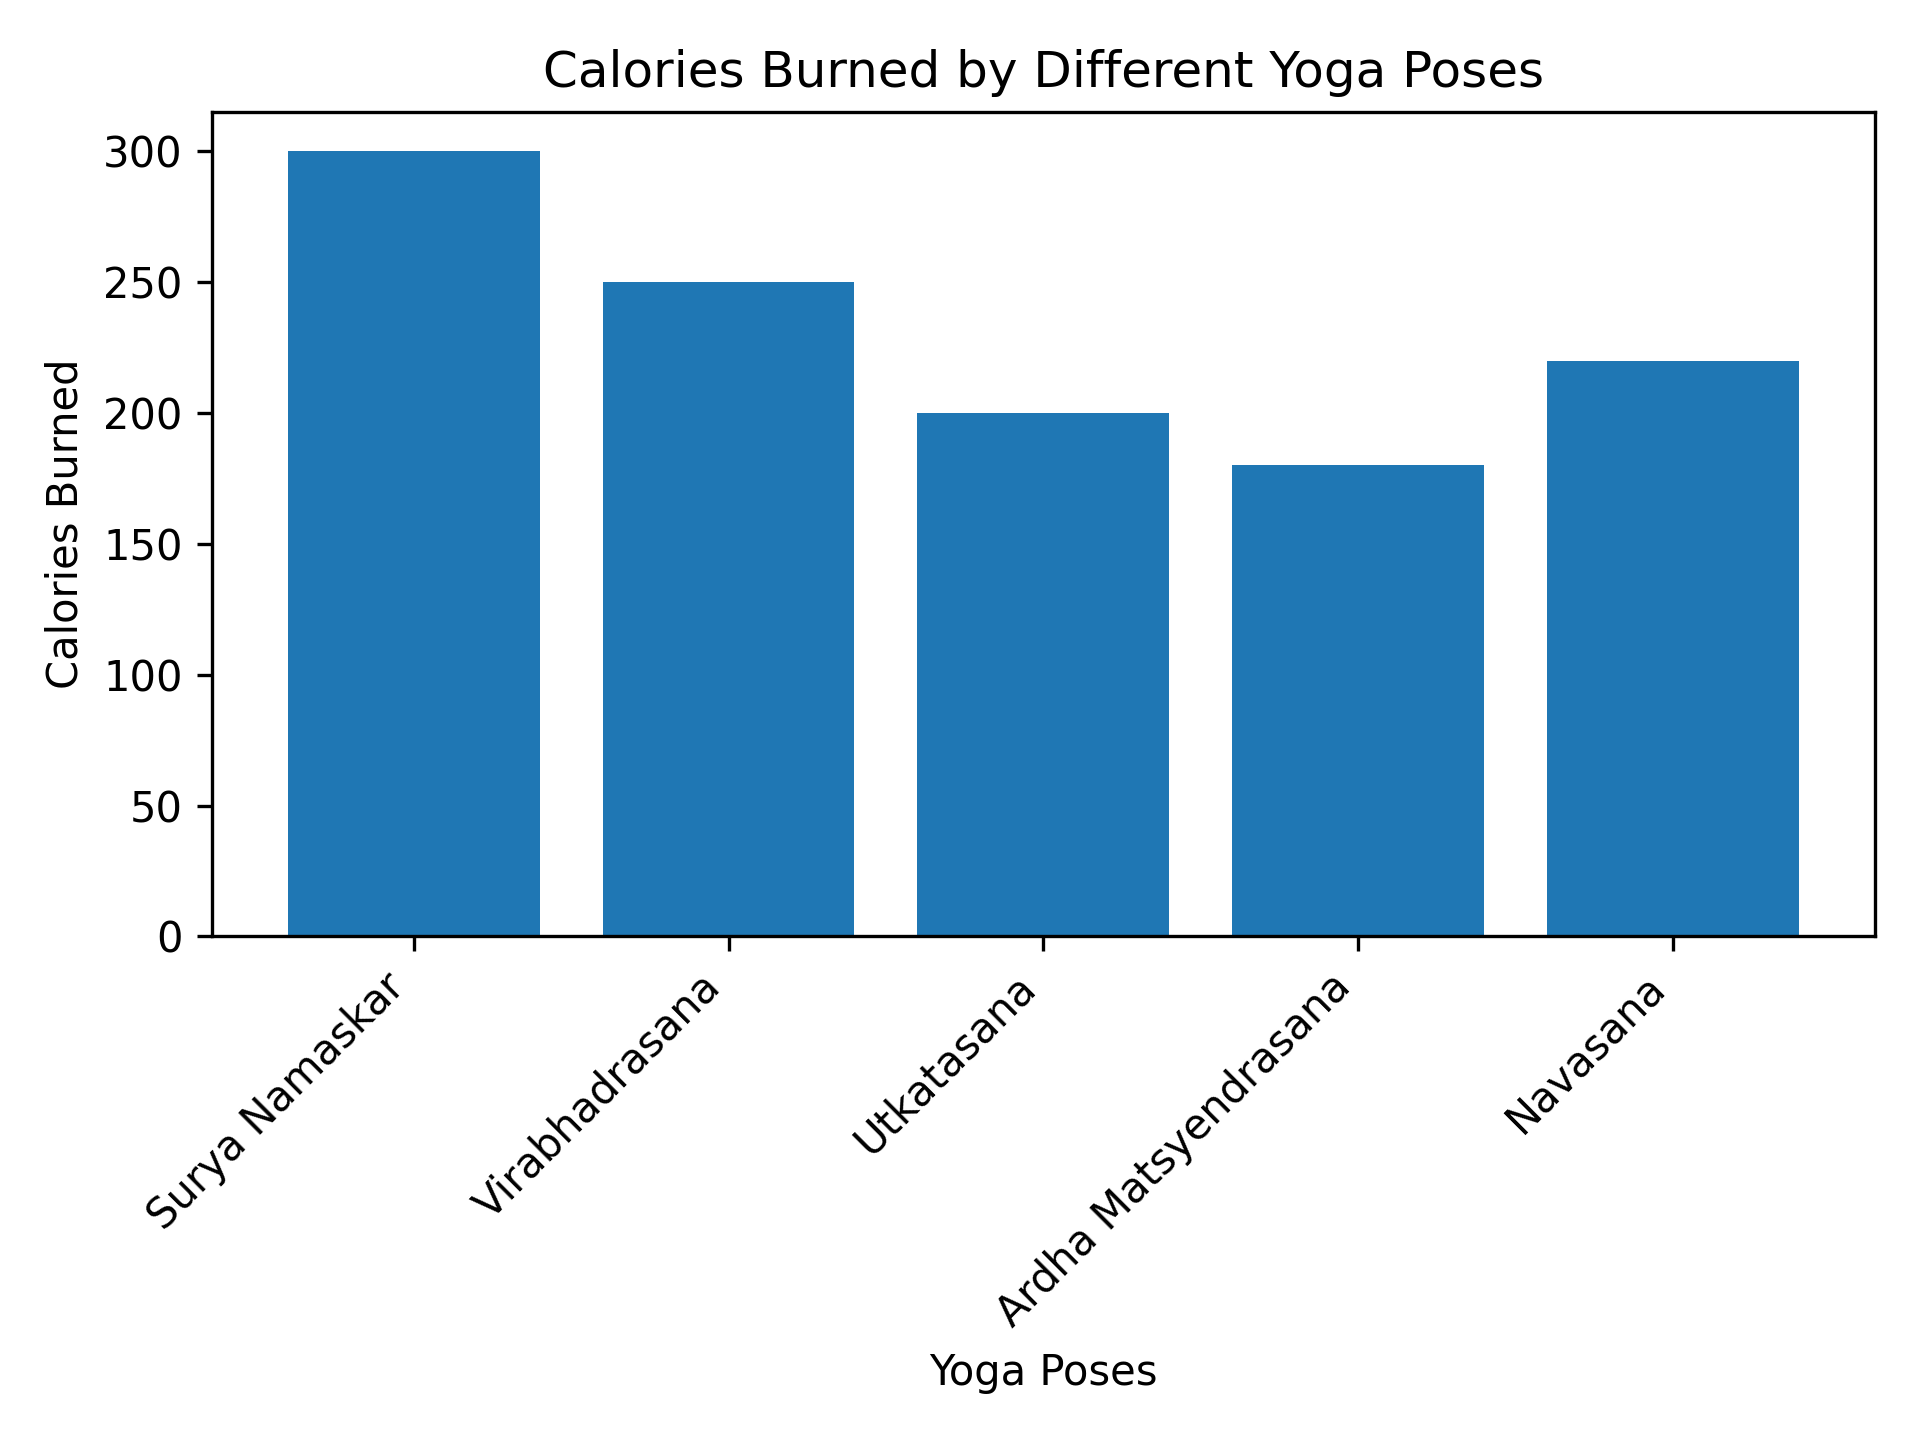 Calories Burned by Different Yoga Poses